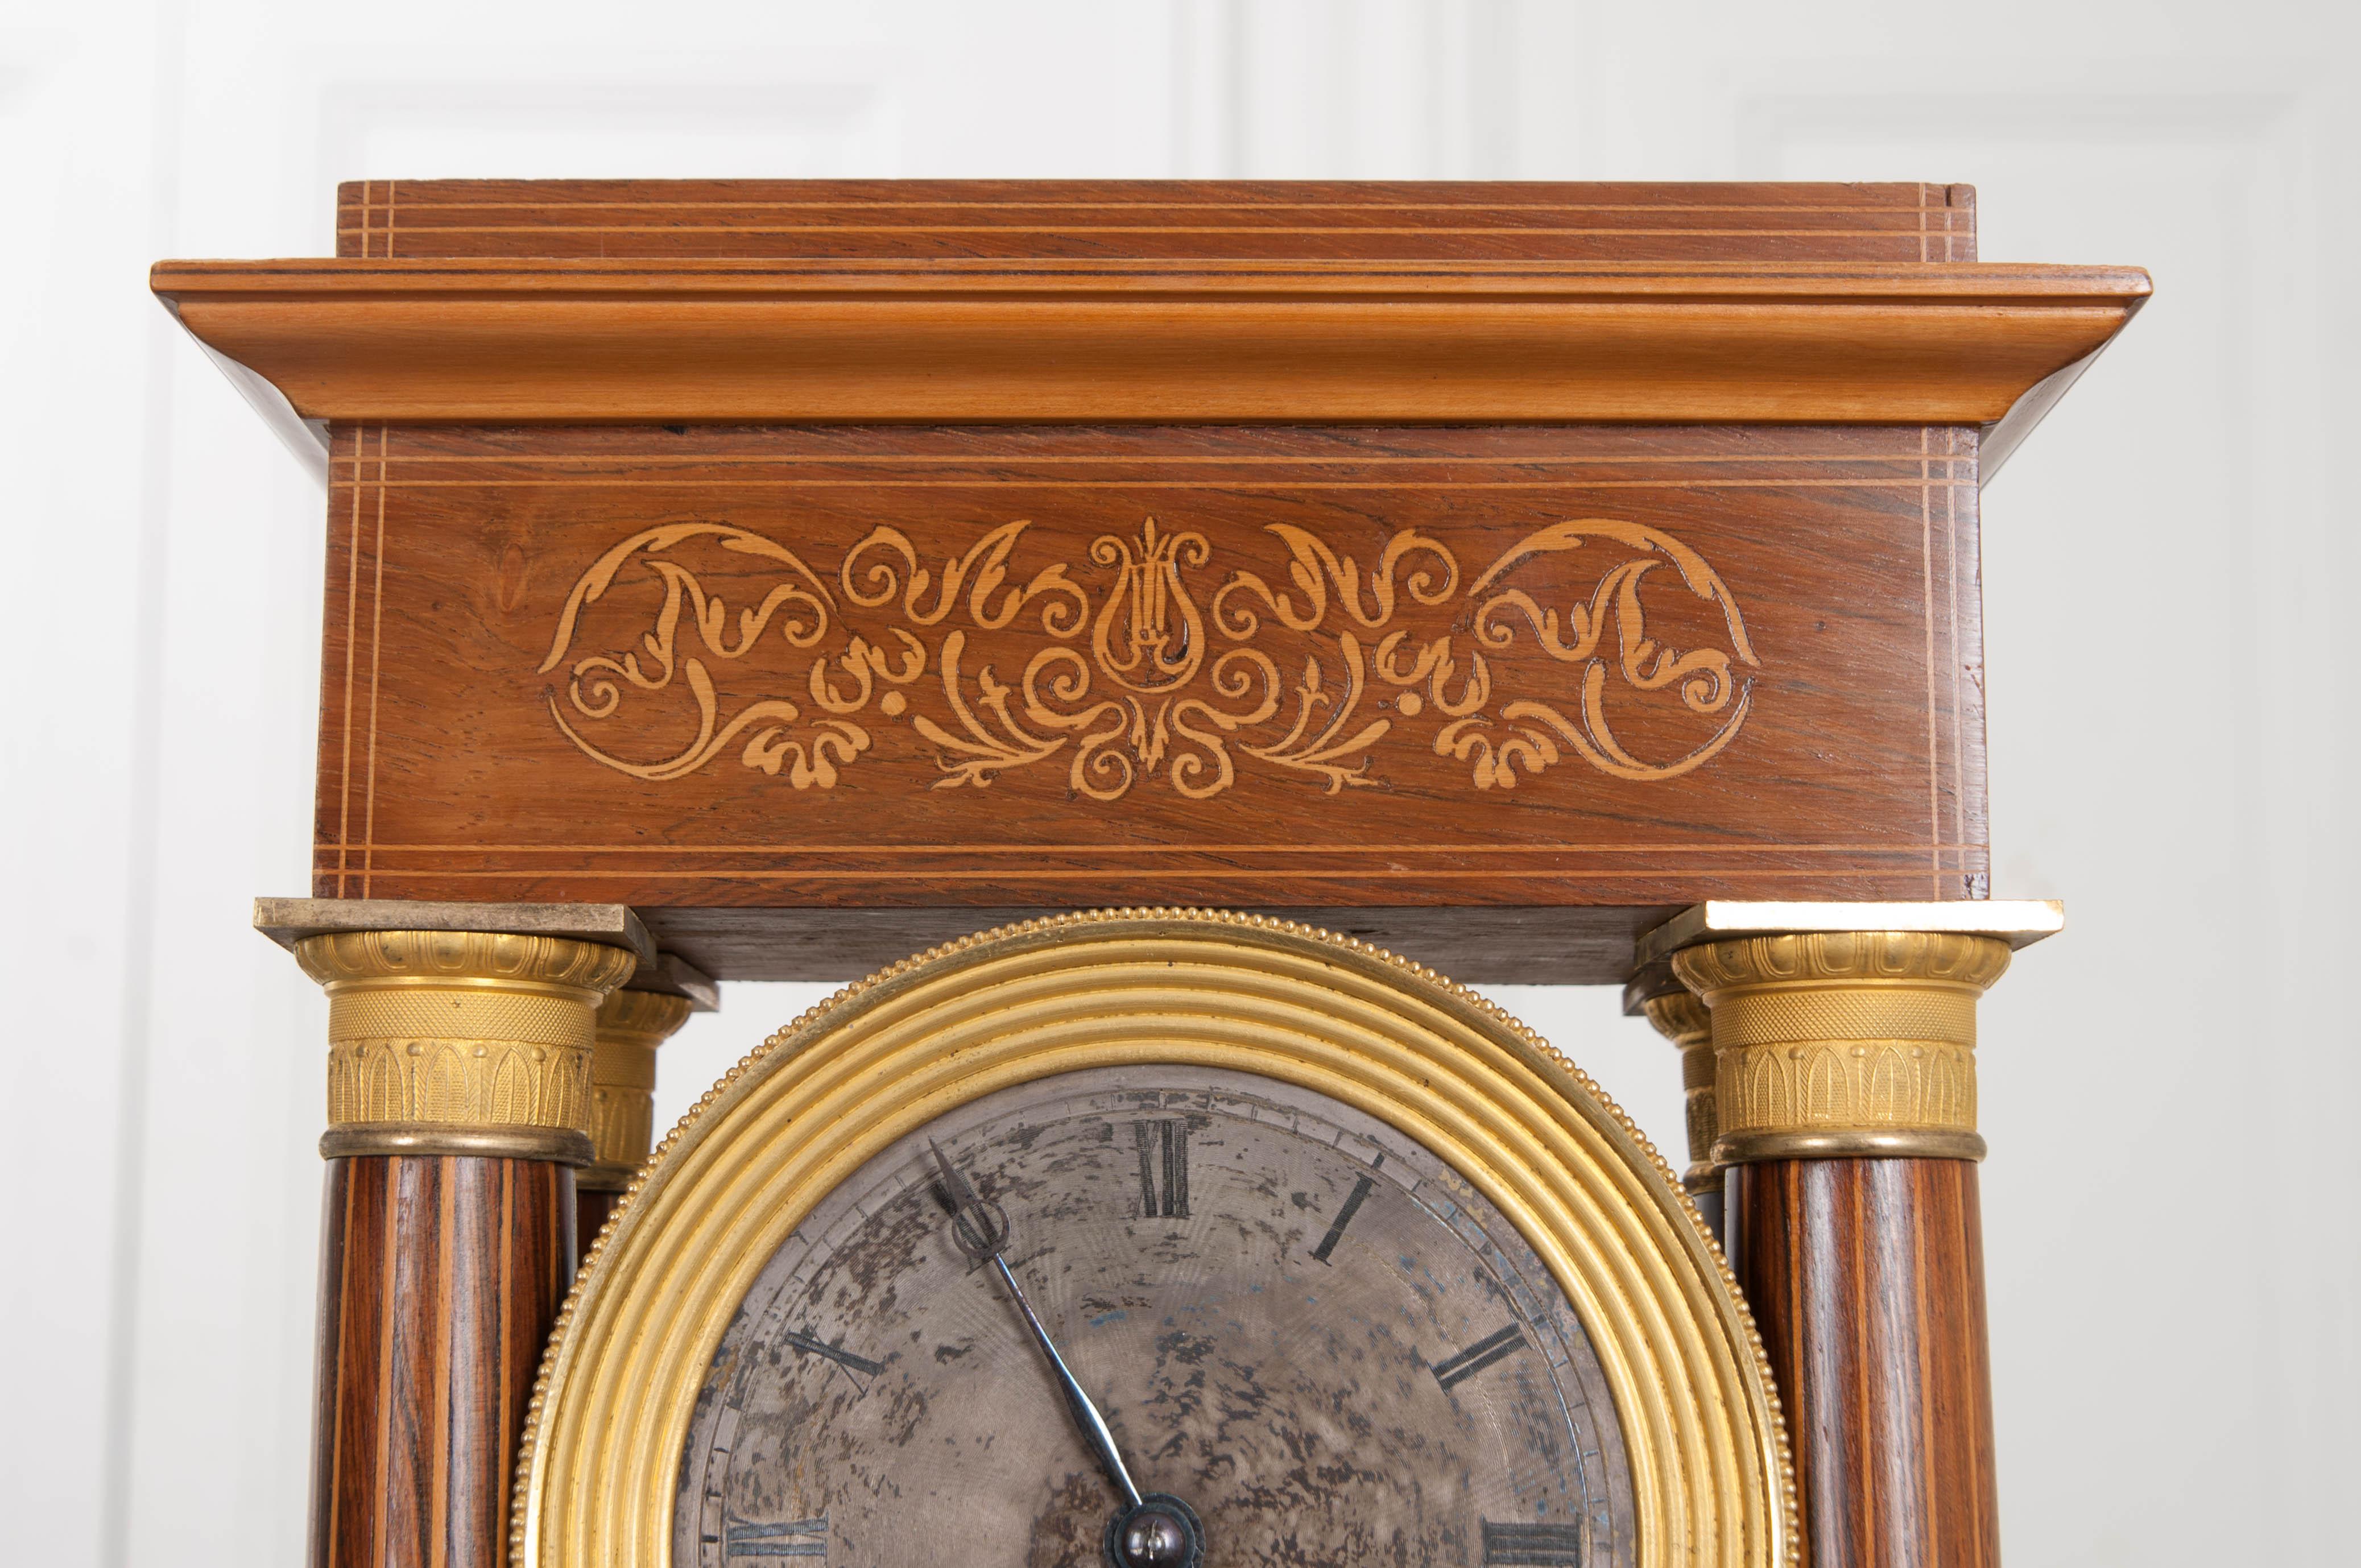 Fine 19th Century Marquetry-Inlaid Satinwood and Gilt-Bronze Portico Clock For Sale 1